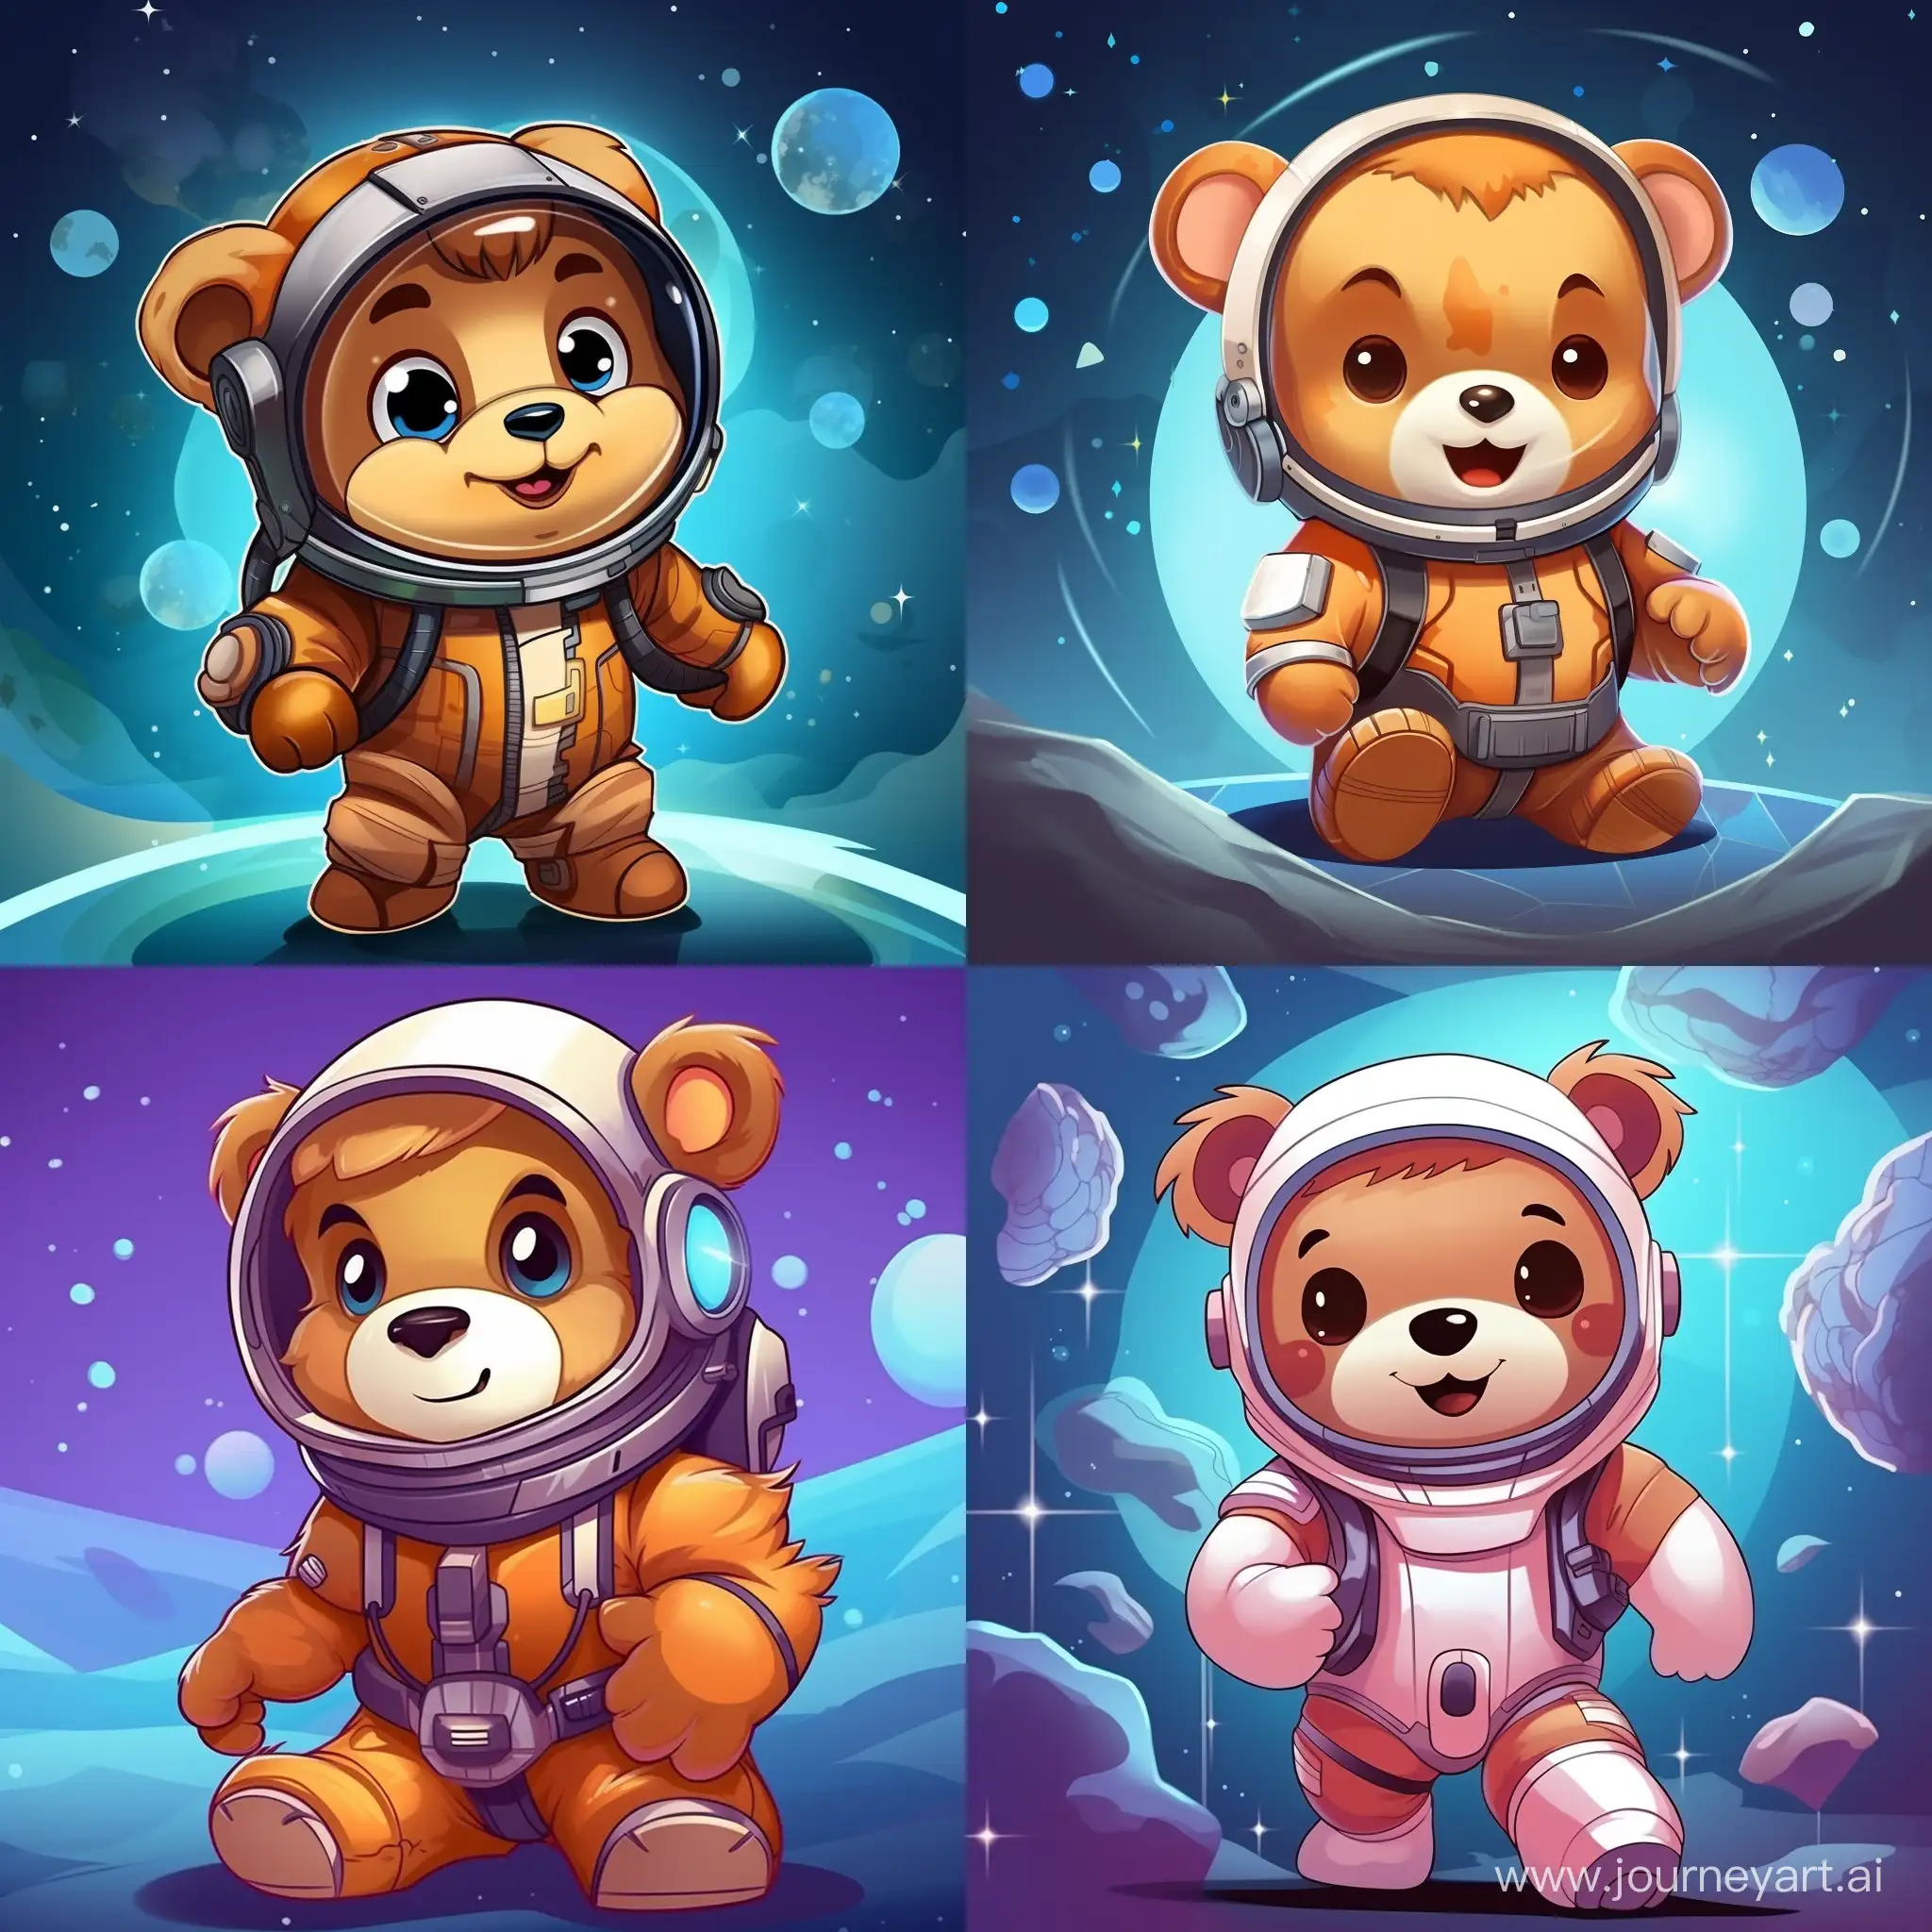 Fun-Cartoon-Teddy-Bear-in-Modern-Astronaut-Outfit-with-SciFi-Background